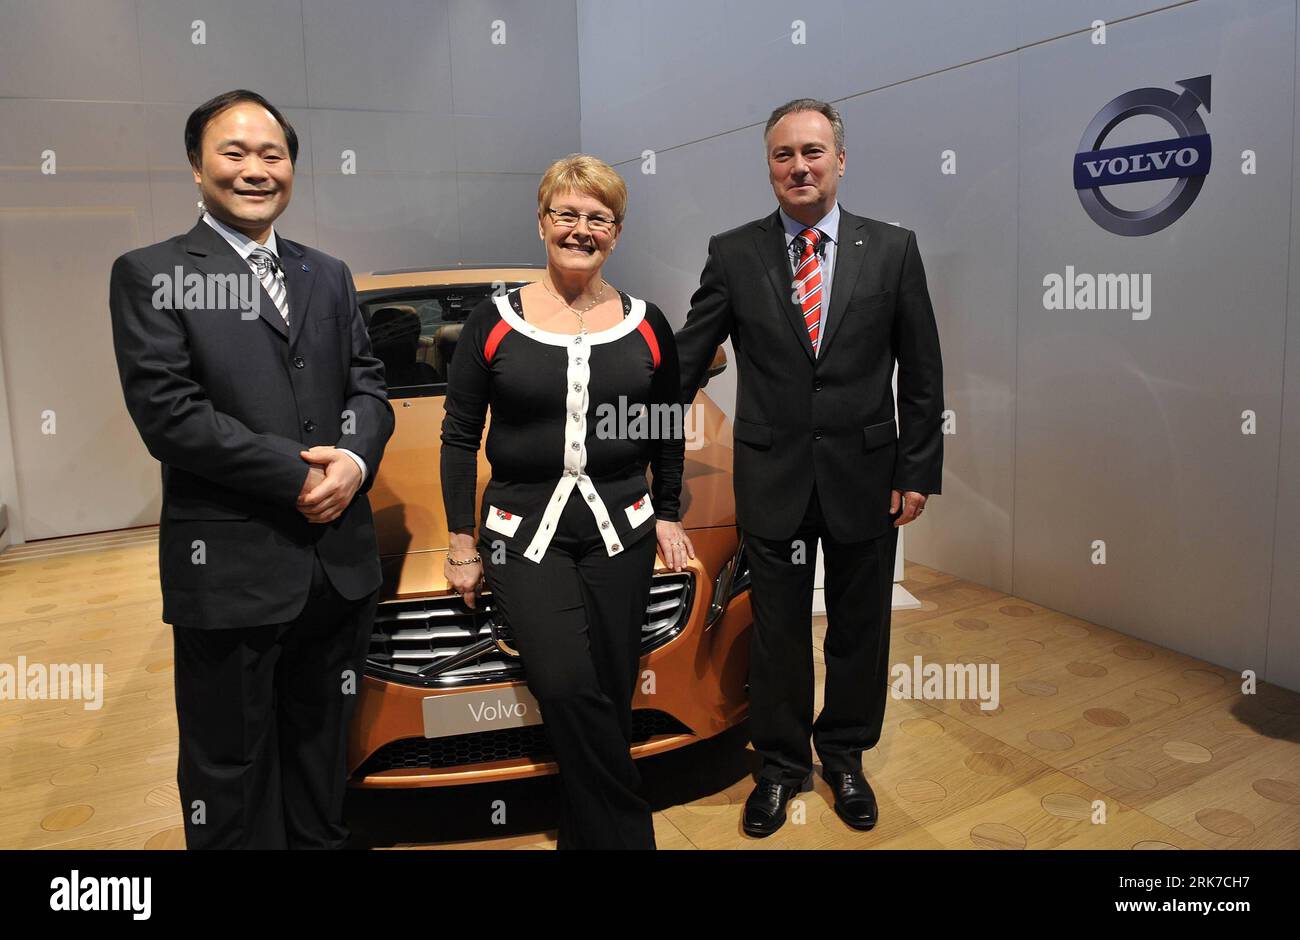 100328 -- GOTEBORG, March 28, 2010 Xinhua -- Geely Chairman Li Shufu L, Swedish Deputy Prime Minister and Minister for Enterprise and Energy Maud Olofsson C and Volvo Cars Chief Executive Officer Stephen Odell attend a press conference after the signing ceremony in Goteborg of Sweden, March 28, 2010. China s Zhejiang Geely Holding Group signed a deal worth 1.8 billion U.S. dollars with Ford Motor Co. here Sunday to acquire the U.S. auto giant s Volvo car unit. Xinhua/Wu Wei zl 22SWEDEN-GOTEBORG-CHINA-GEELY-DEAL-VOLVO PUBLICATIONxNOTxINxCHN Stock Photo